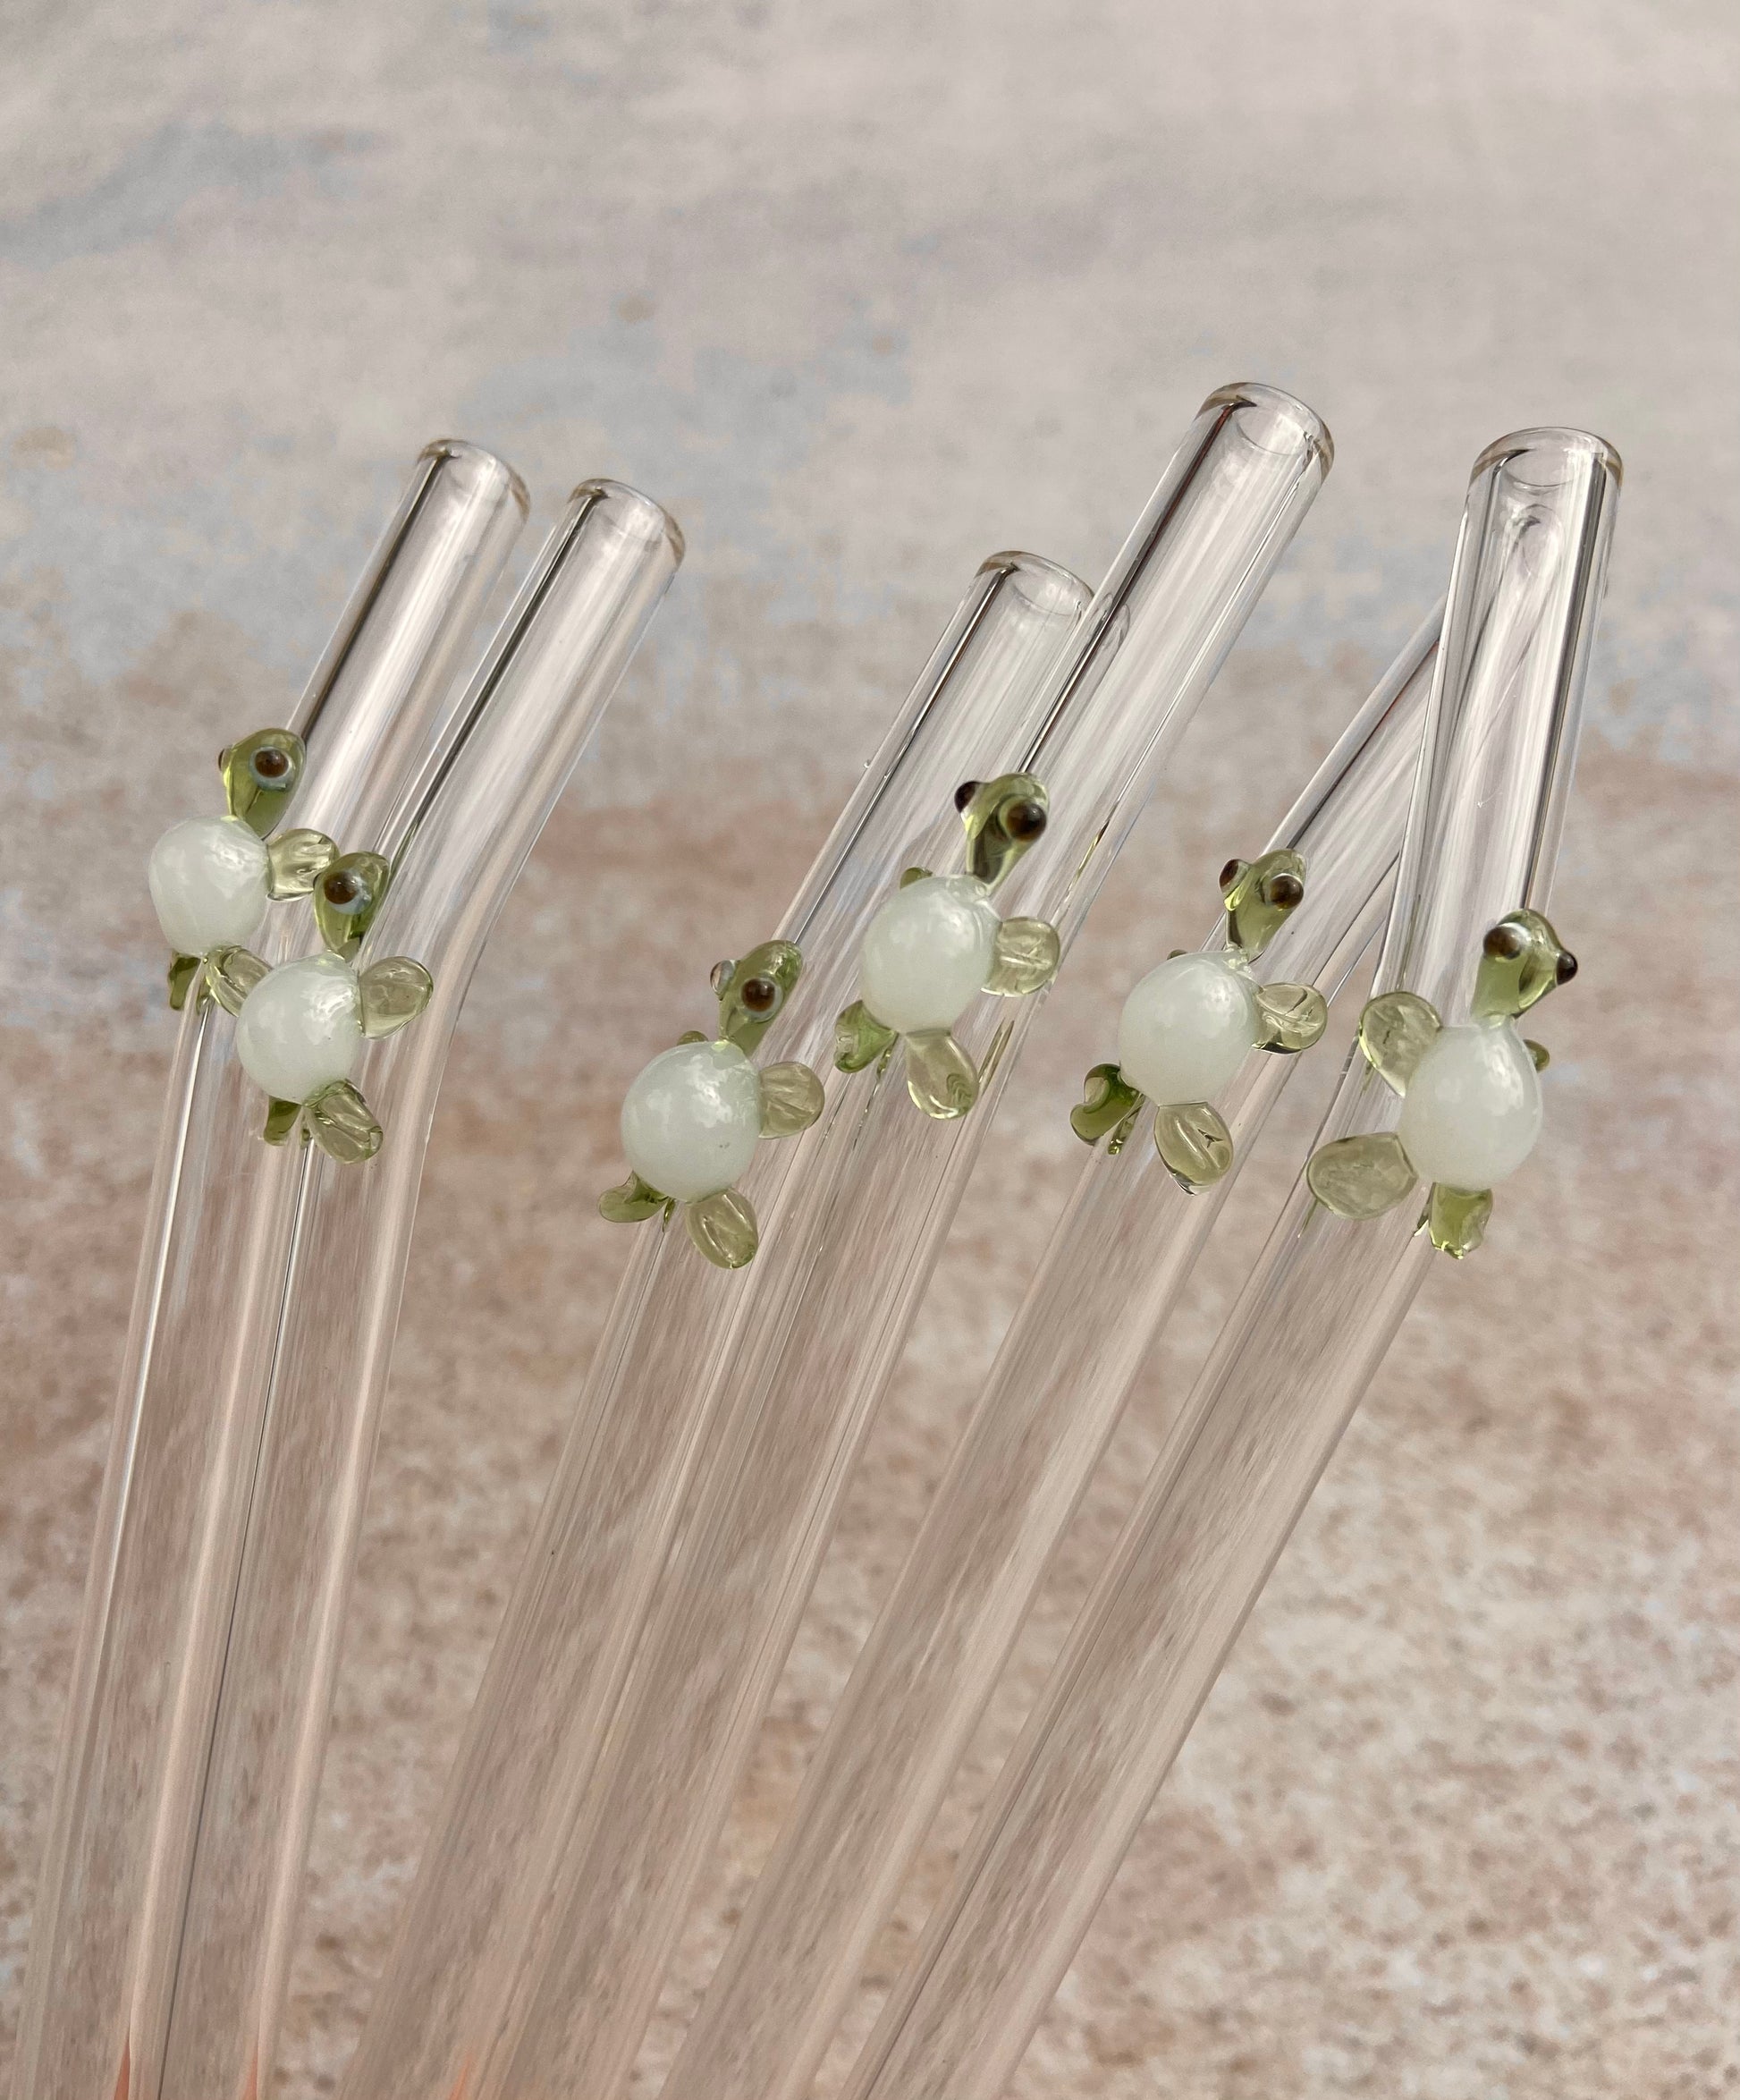 Reusable Glass Drinking Straws,size,including Reusable Glass